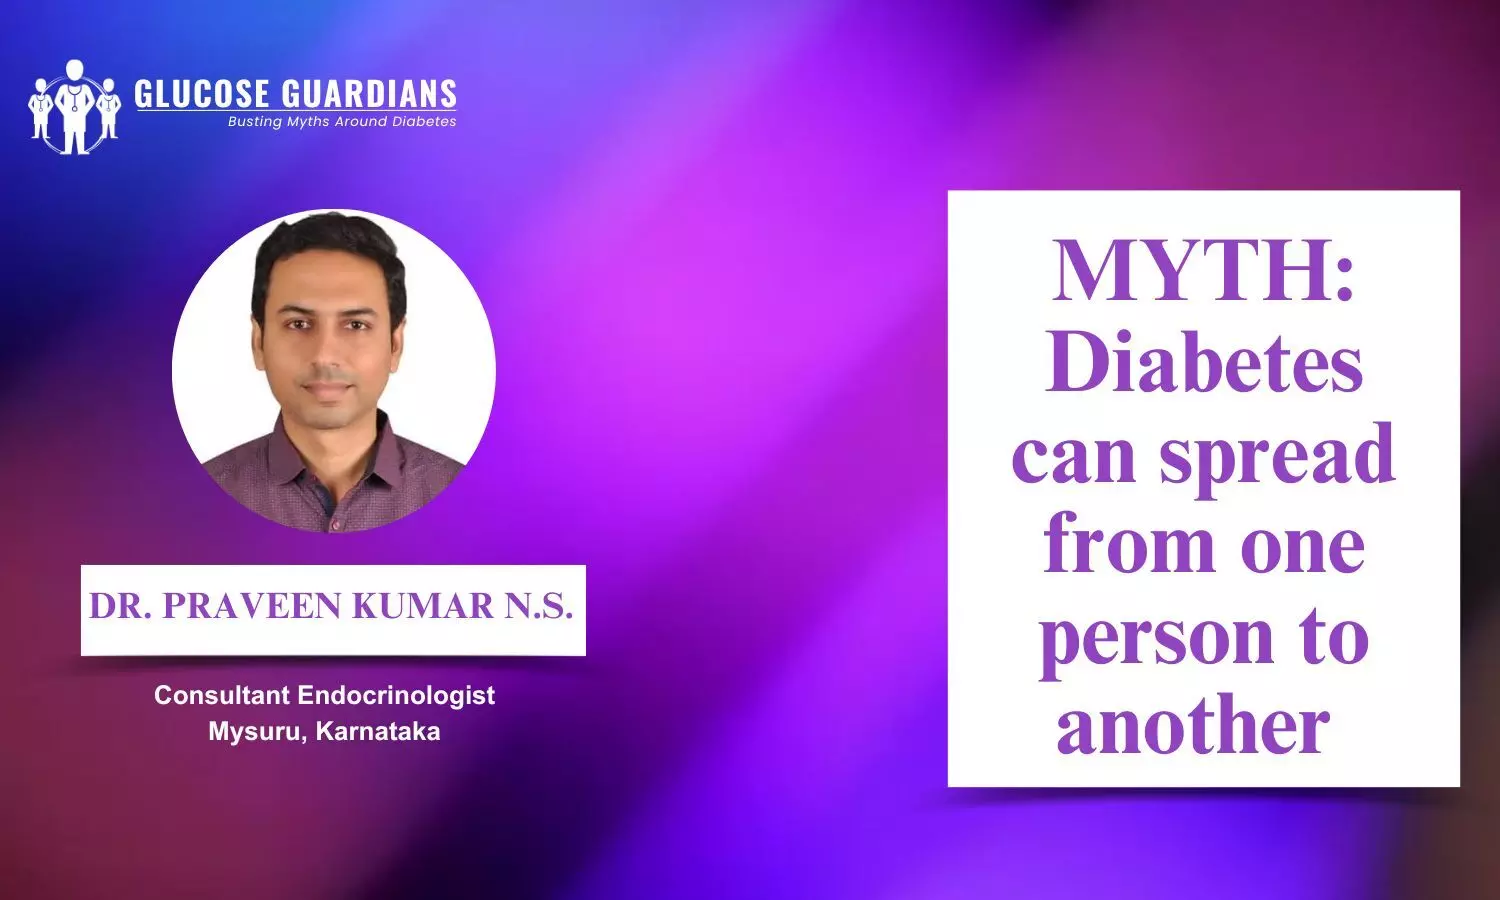 Can diabetes be transmitted from one person to another? - Dr Praveen Kumar N.S